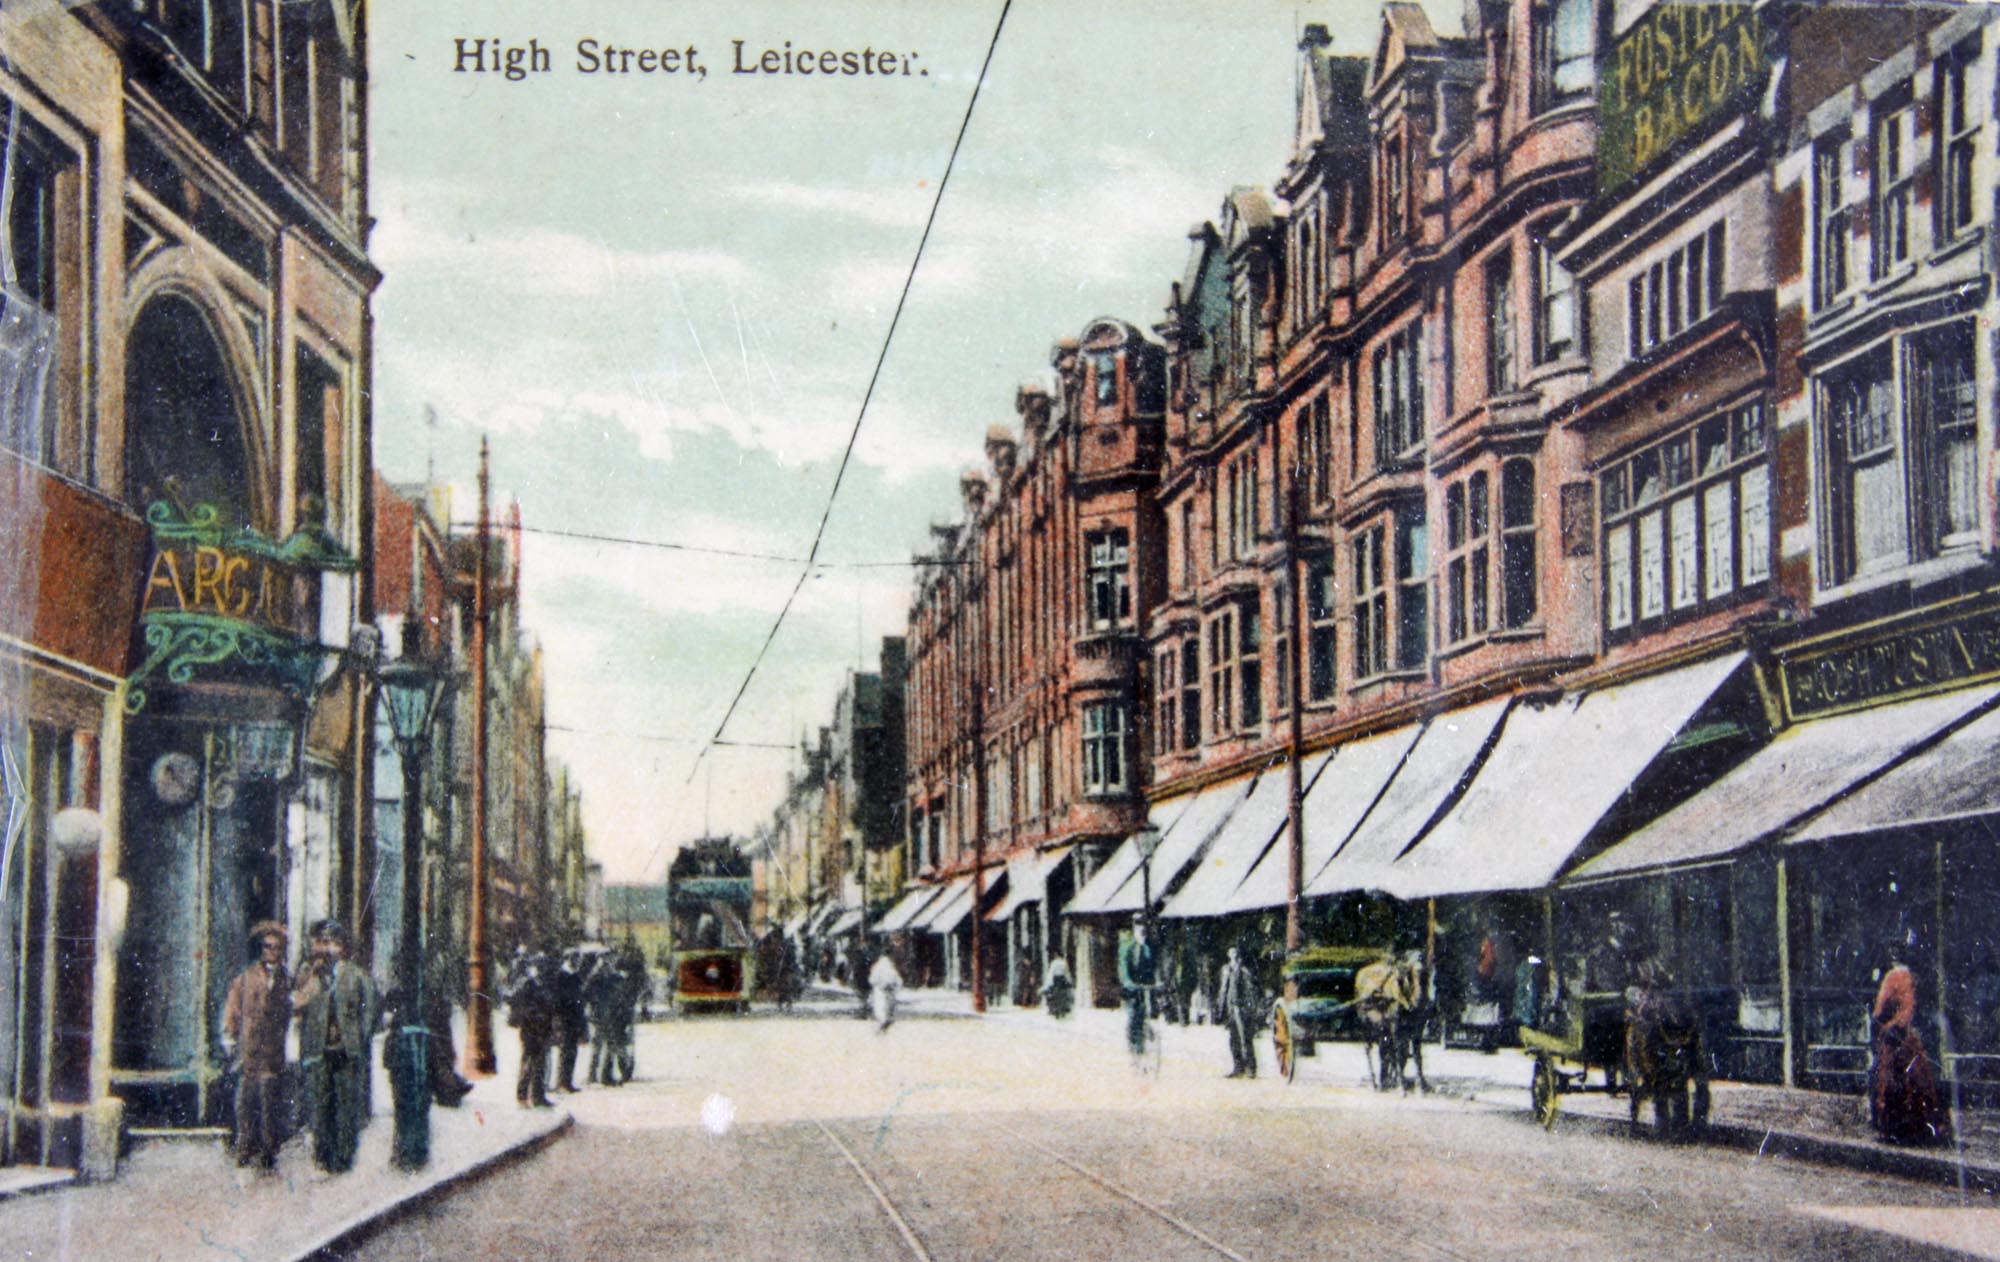 ‘High Street, Leicester’ a postcard from around 1910 - Leicestershire Record Office